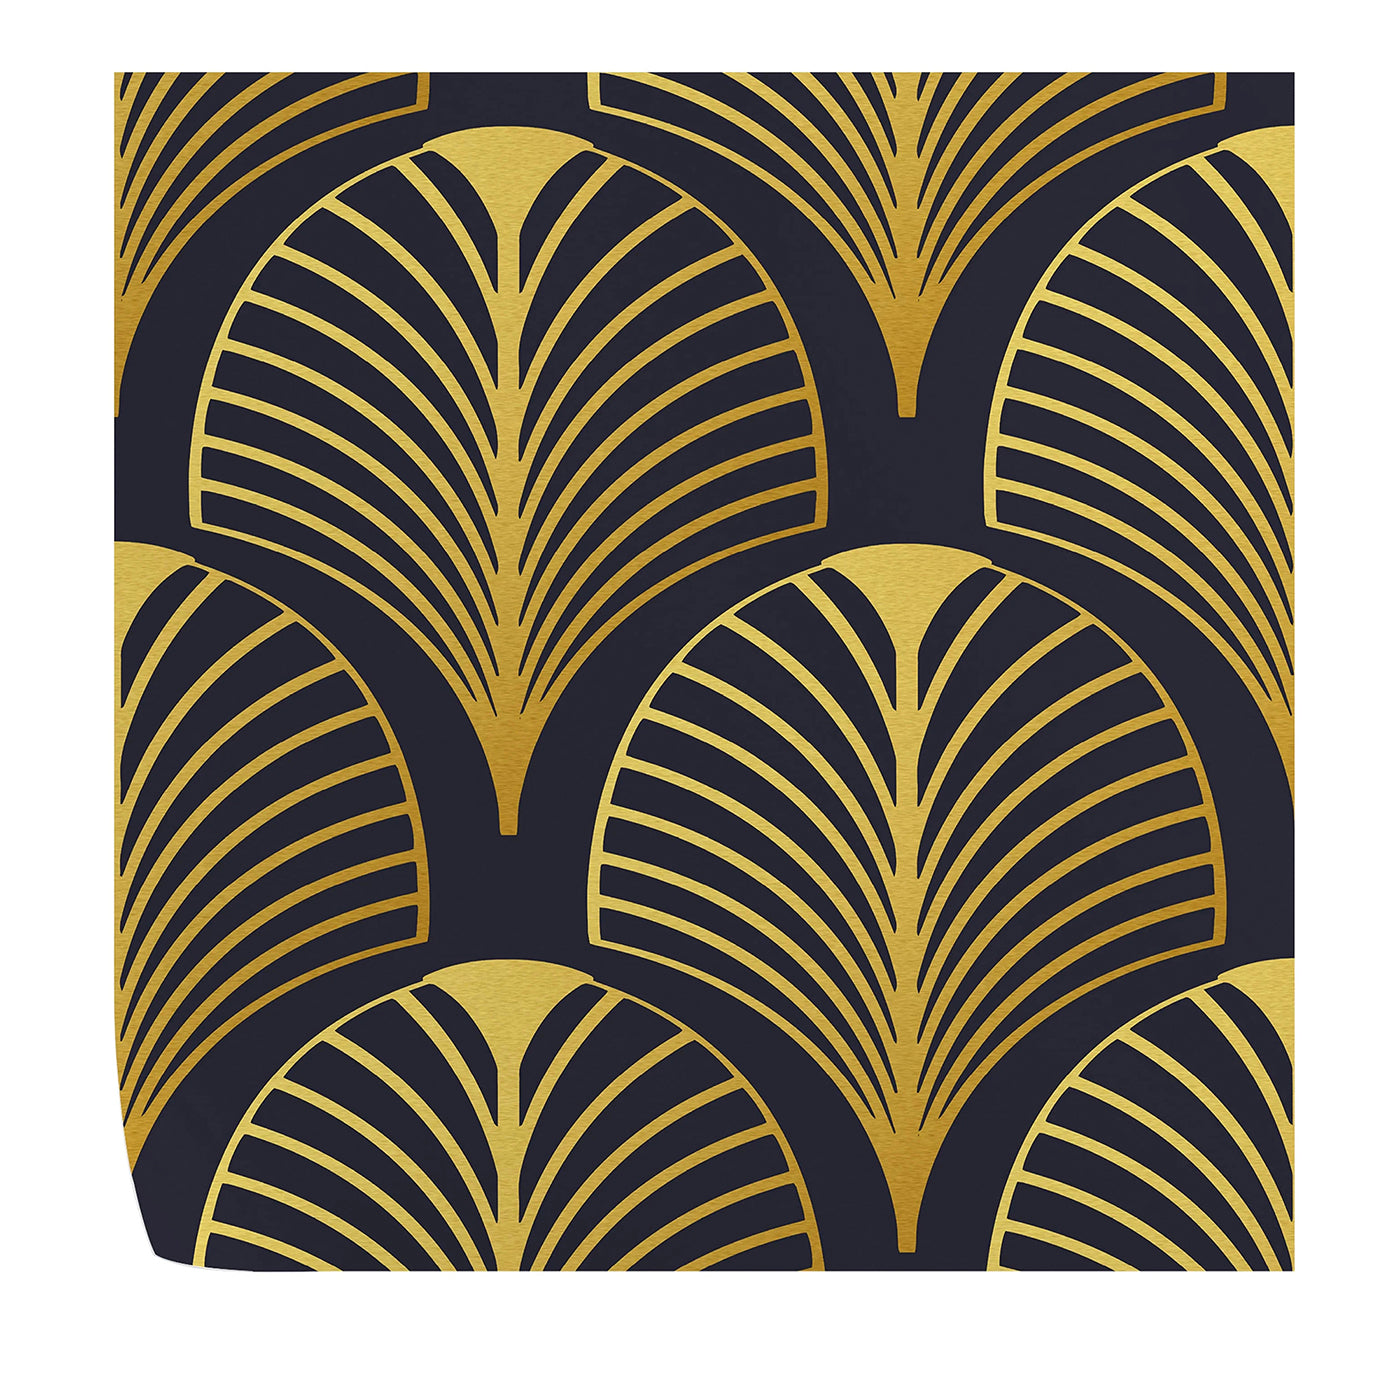 Art Deco Wallpaper in Vintage Style - Main view